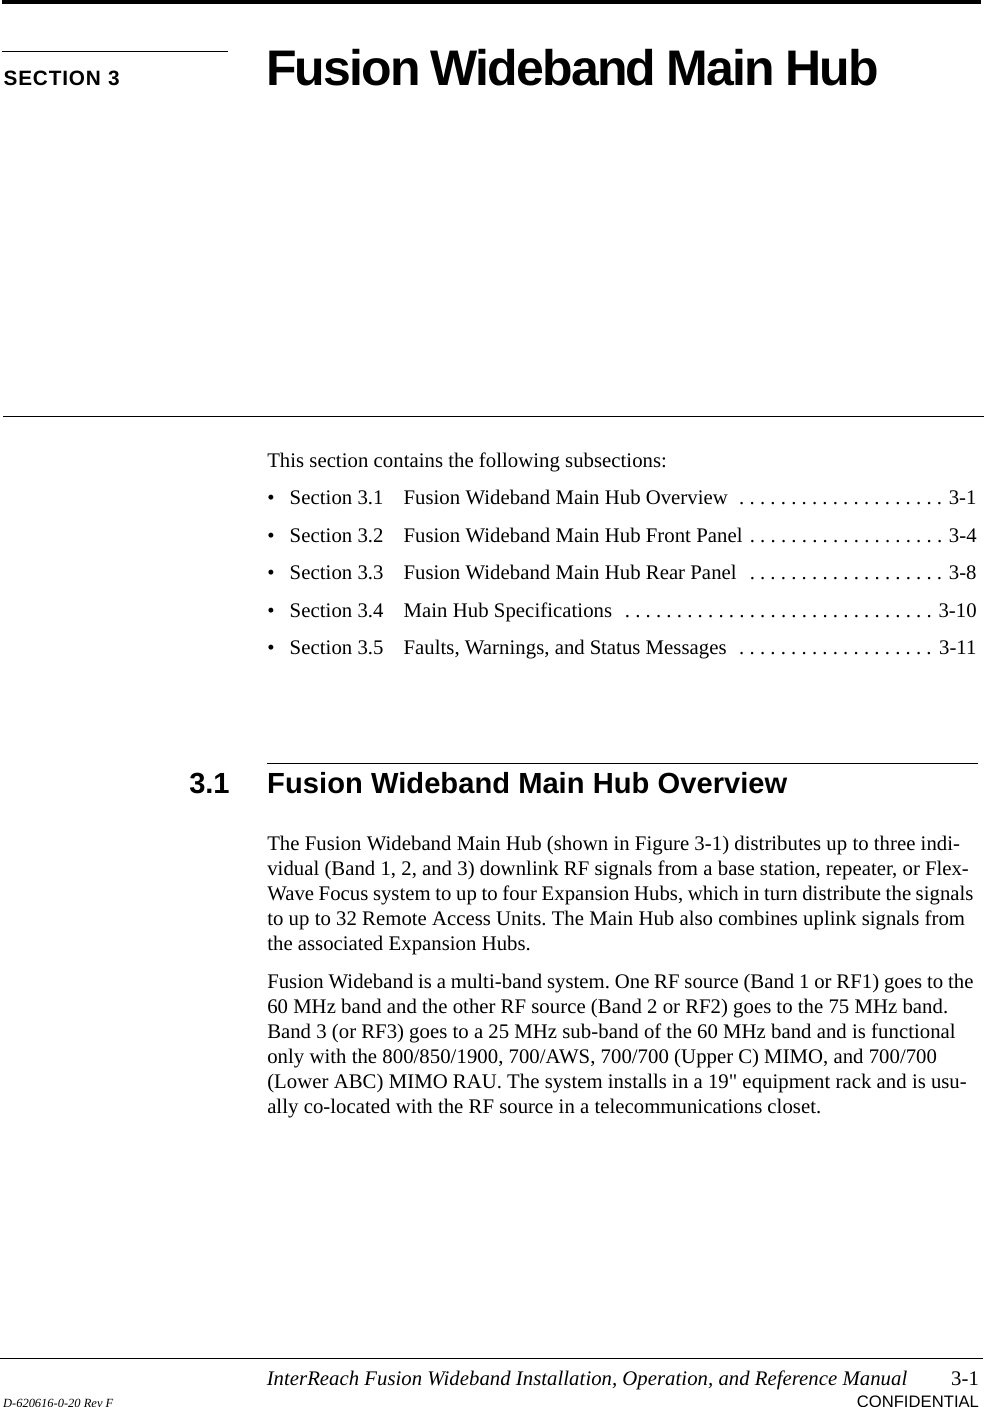 InterReach Fusion Wideband Installation, Operation, and Reference Manual 3-1D-620616-0-20 Rev F CONFIDENTIALSECTION 3 Fusion Wideband Main HubThis section contains the following subsections:• Section 3.1   Fusion Wideband Main Hub Overview  . . . . . . . . . . . . . . . . . . . . 3-1• Section 3.2   Fusion Wideband Main Hub Front Panel . . . . . . . . . . . . . . . . . . . 3-4• Section 3.3   Fusion Wideband Main Hub Rear Panel  . . . . . . . . . . . . . . . . . . . 3-8• Section 3.4   Main Hub Specifications  . . . . . . . . . . . . . . . . . . . . . . . . . . . . . . 3-10• Section 3.5   Faults, Warnings, and Status Messages  . . . . . . . . . . . . . . . . . . . 3-113.1 Fusion Wideband Main Hub OverviewThe Fusion Wideband Main Hub (shown in Figure 3-1) distributes up to three indi-vidual (Band 1, 2, and 3) downlink RF signals from a base station, repeater, or Flex-Wave Focus system to up to four Expansion Hubs, which in turn distribute the signals to up to 32 Remote Access Units. The Main Hub also combines uplink signals from the associated Expansion Hubs.Fusion Wideband is a multi-band system. One RF source (Band 1 or RF1) goes to the 60 MHz band and the other RF source (Band 2 or RF2) goes to the 75 MHz band. Band 3 (or RF3) goes to a 25 MHz sub-band of the 60 MHz band and is functional only with the 800/850/1900, 700/AWS, 700/700 (Upper C) MIMO, and 700/700 (Lower ABC) MIMO RAU. The system installs in a 19&quot; equipment rack and is usu-ally co-located with the RF source in a telecommunications closet.